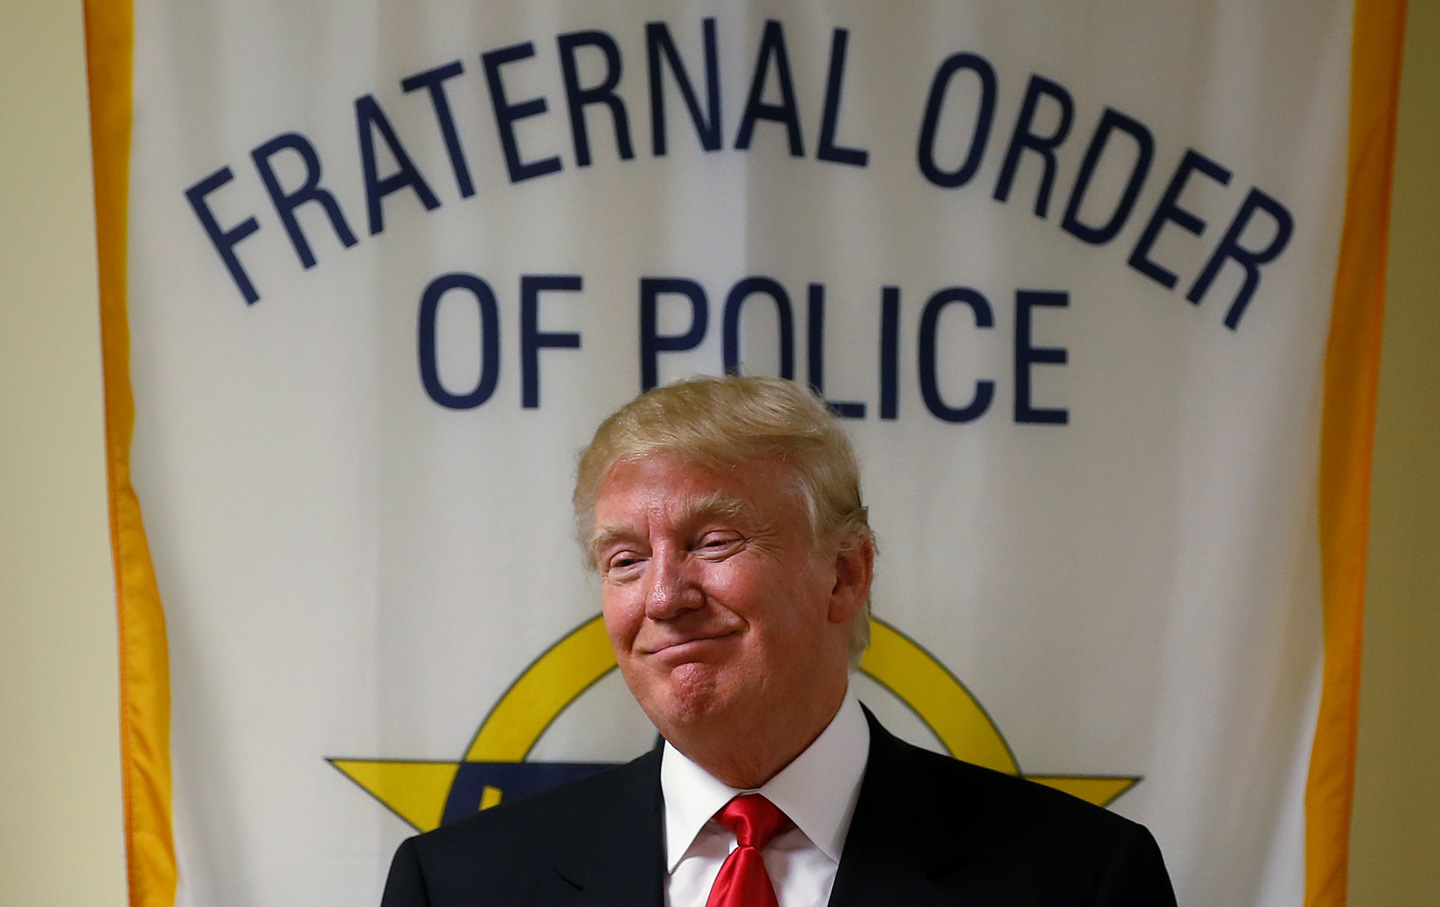 The Fraternal Order of Police Must Go